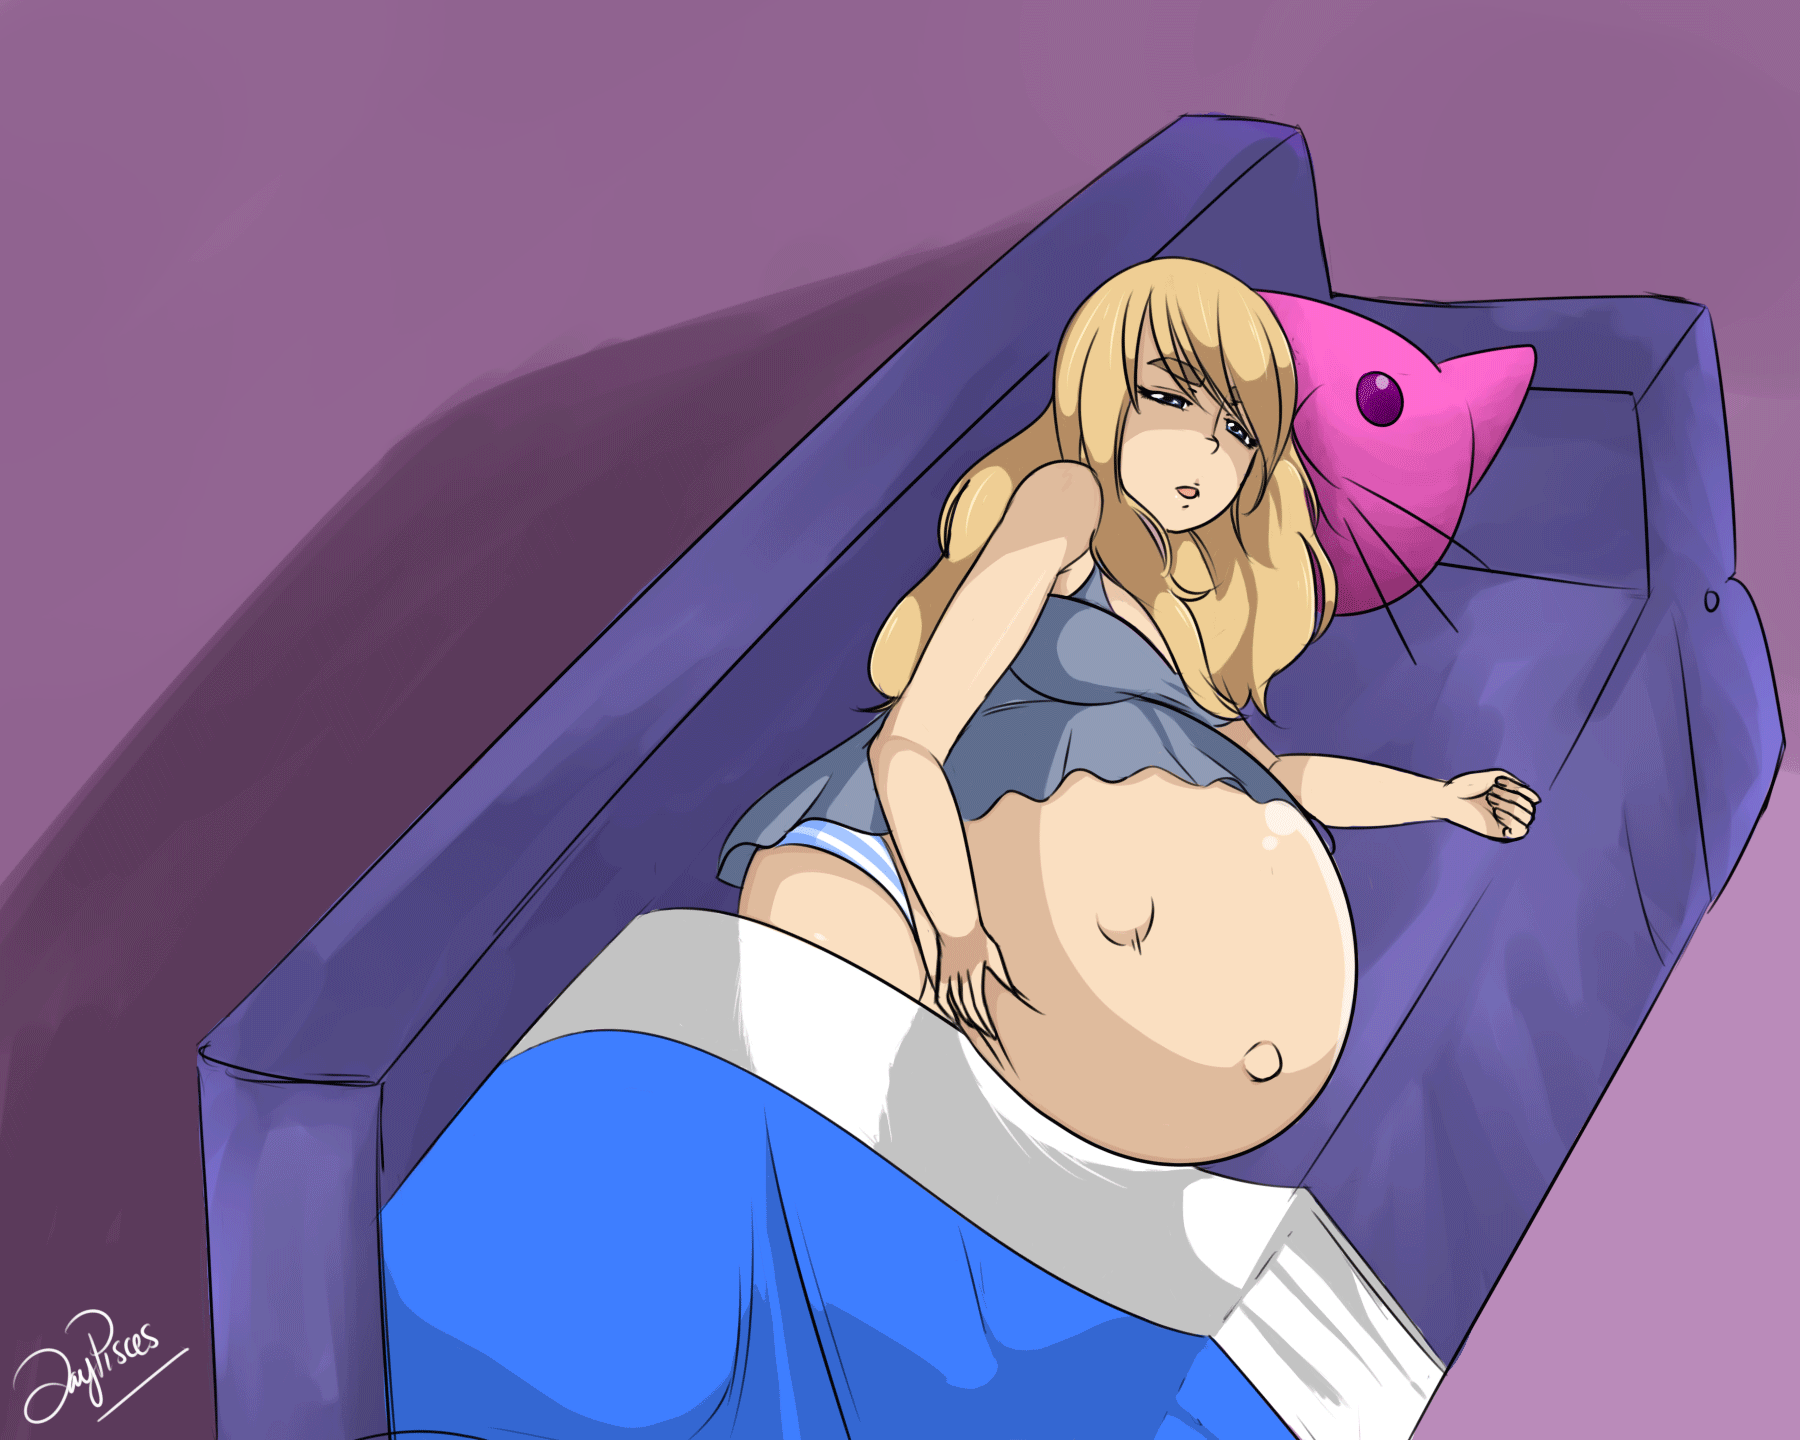 Icecap recomended inflation belly stuffed